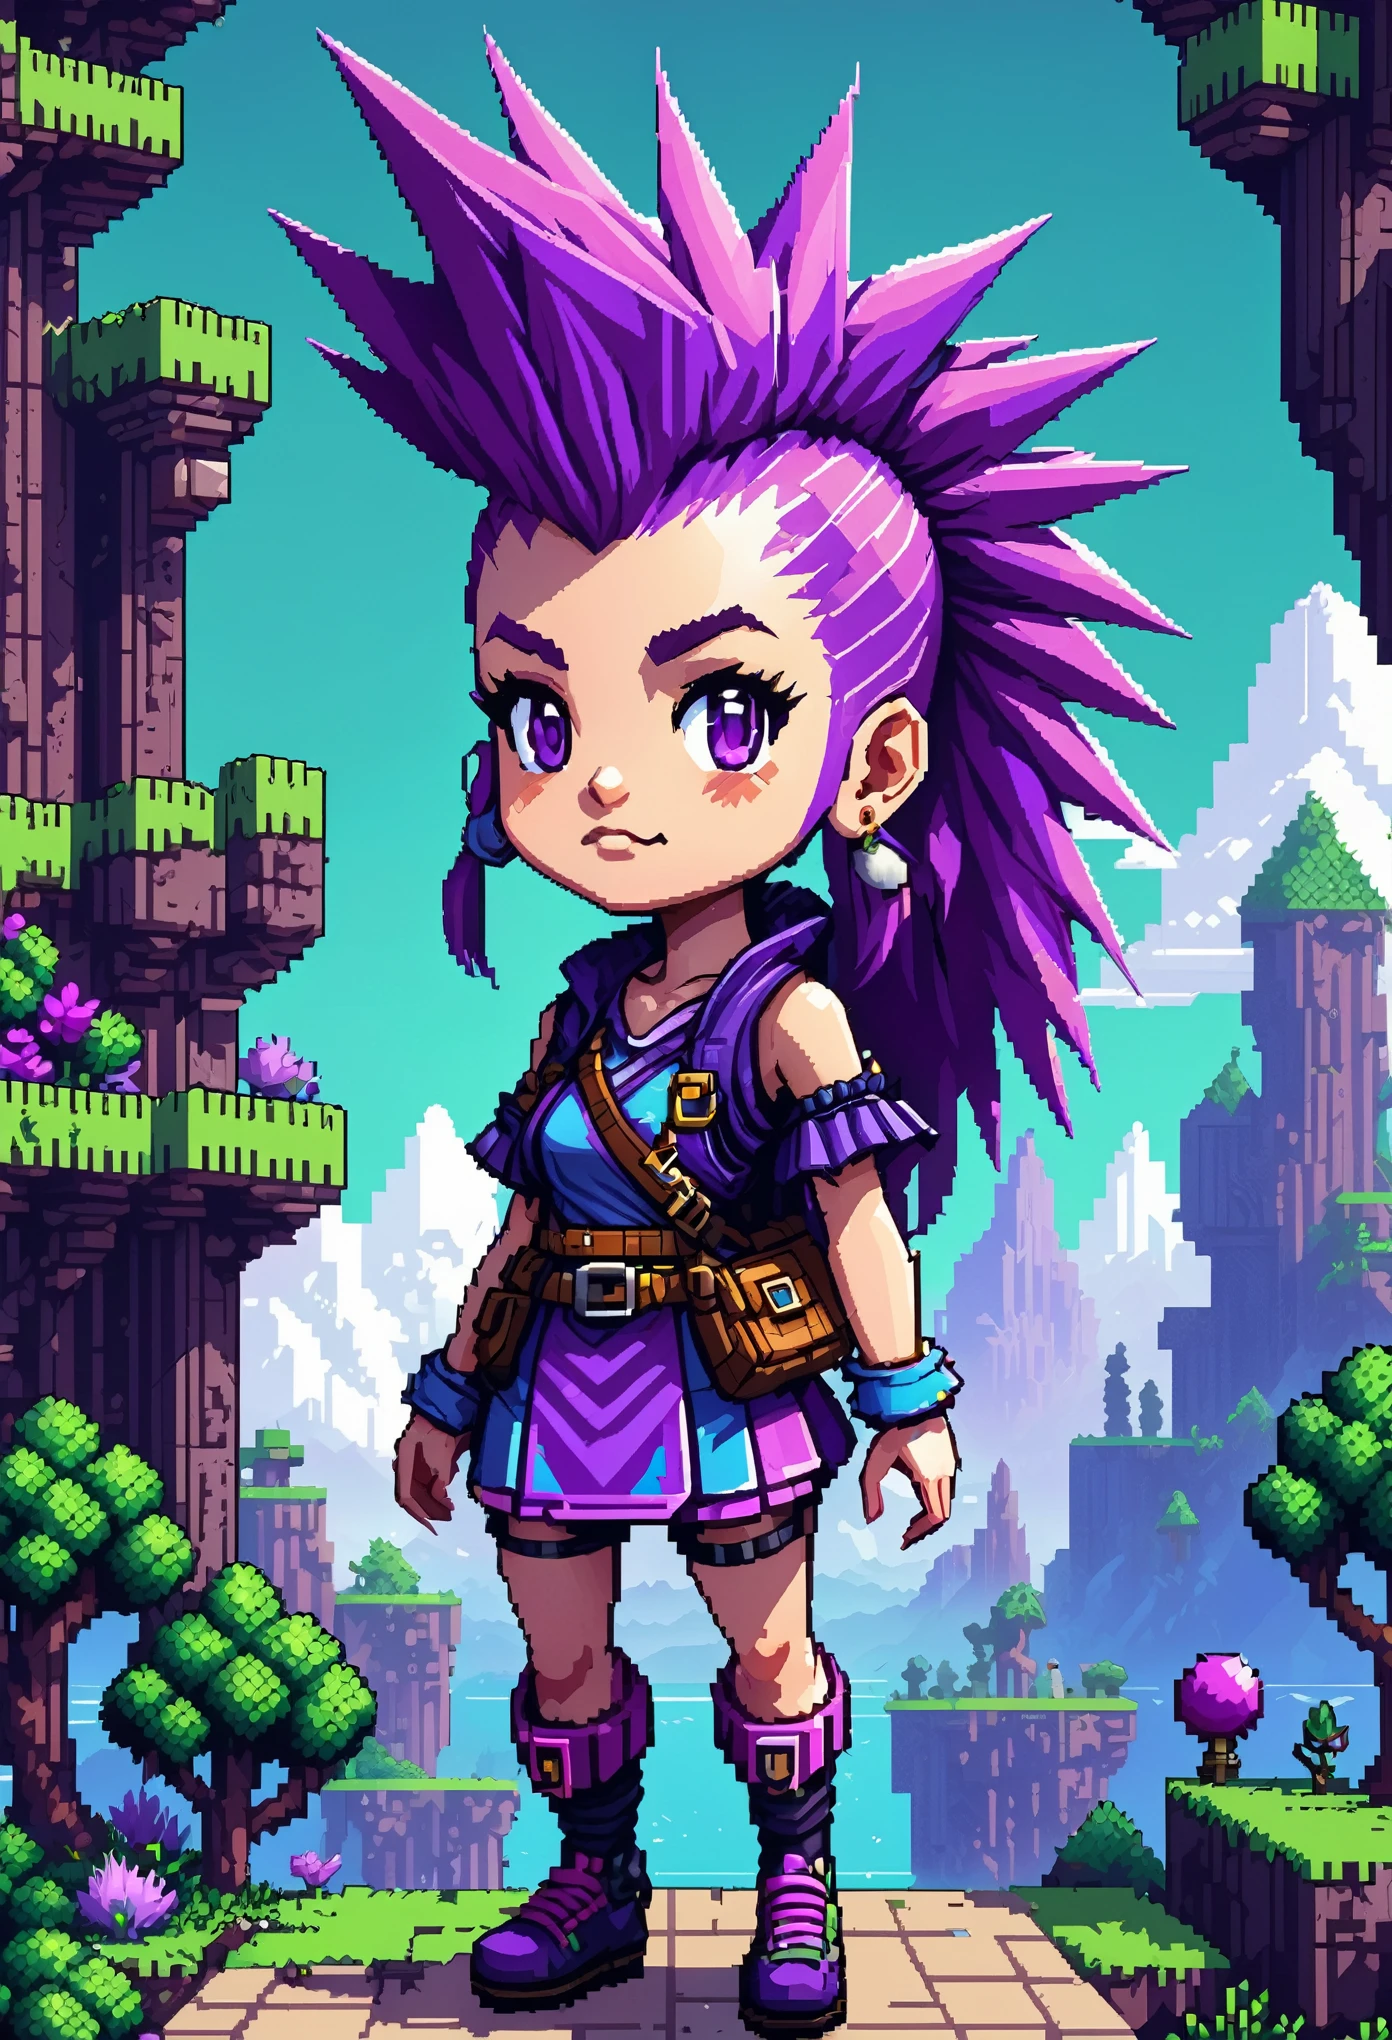 Pixel-Art Adventure featuring a Girl with a purple mohawk: Pixelated girl character, vibrant 8-bit environment, reminiscent of classic games.,Leonardo Style